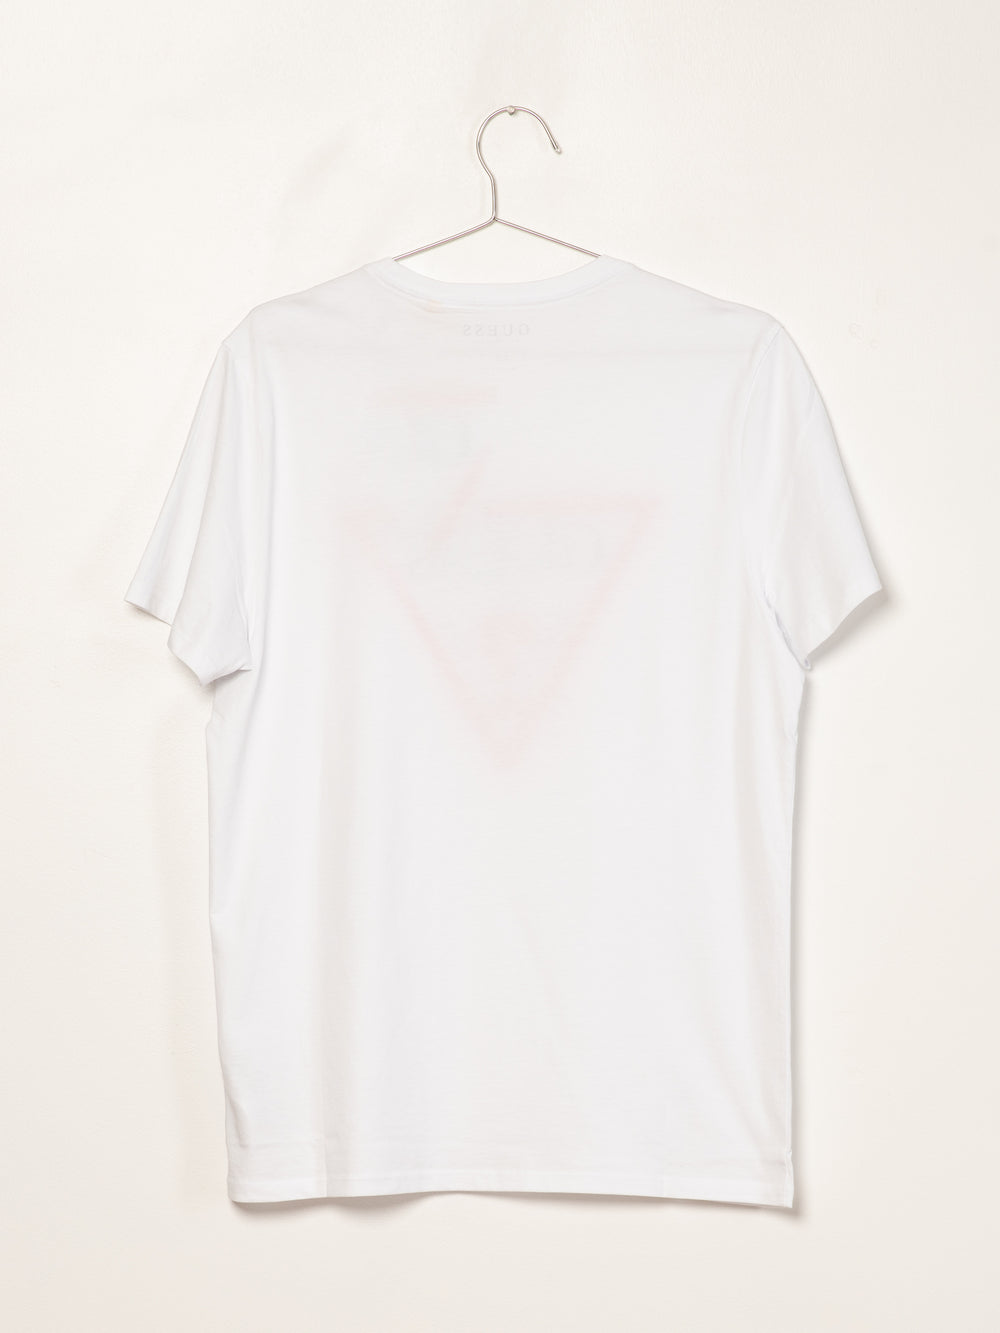 GUESS CLASSIC TRIANGLE LOGO LOGO T  - CLEARANCE